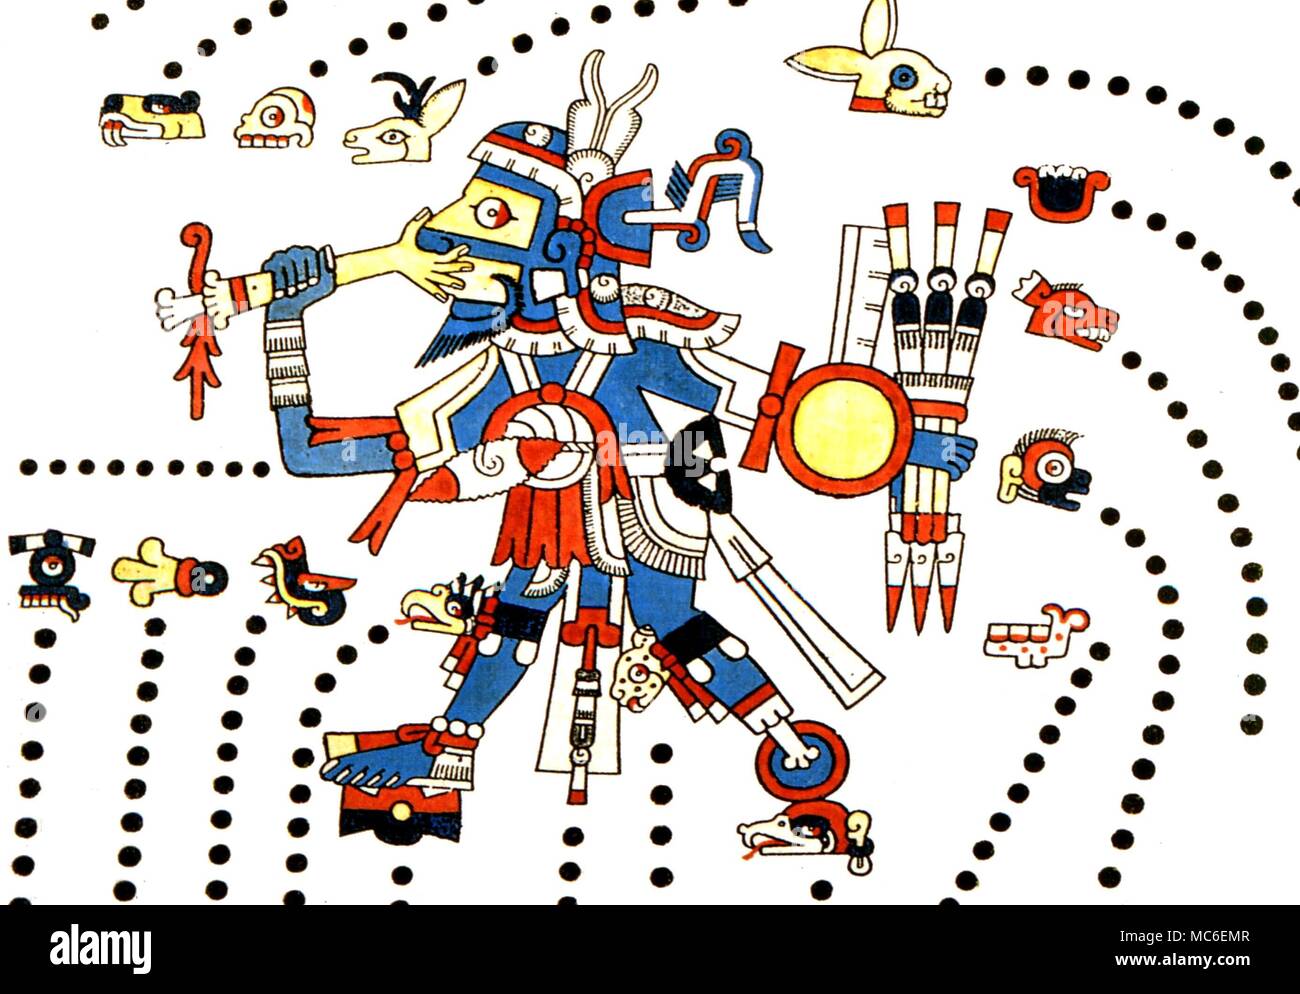 CALENDARS - Mayan Image of Tezcatlipoca, the God of War, honoured as Huitzilopochtli. the patron god of the Aztecs. Around him are mayan systems of dating. Artwork after the Codex Fejervary-Mayer Stock Photo